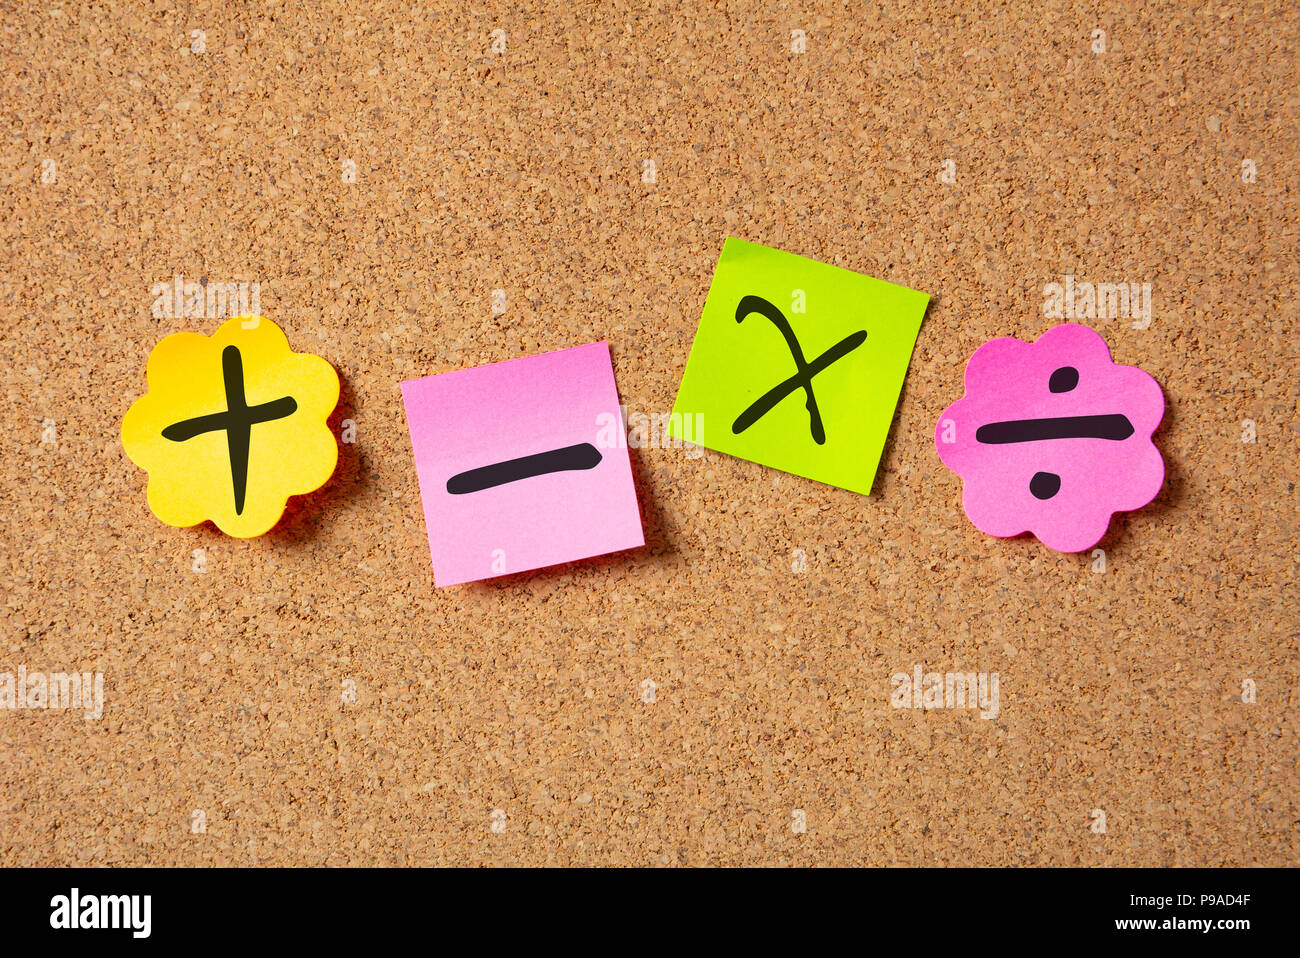 School maths concept. Sticky colorful notes in flower shape isolated with math symbols on cork board background. Stock Photo